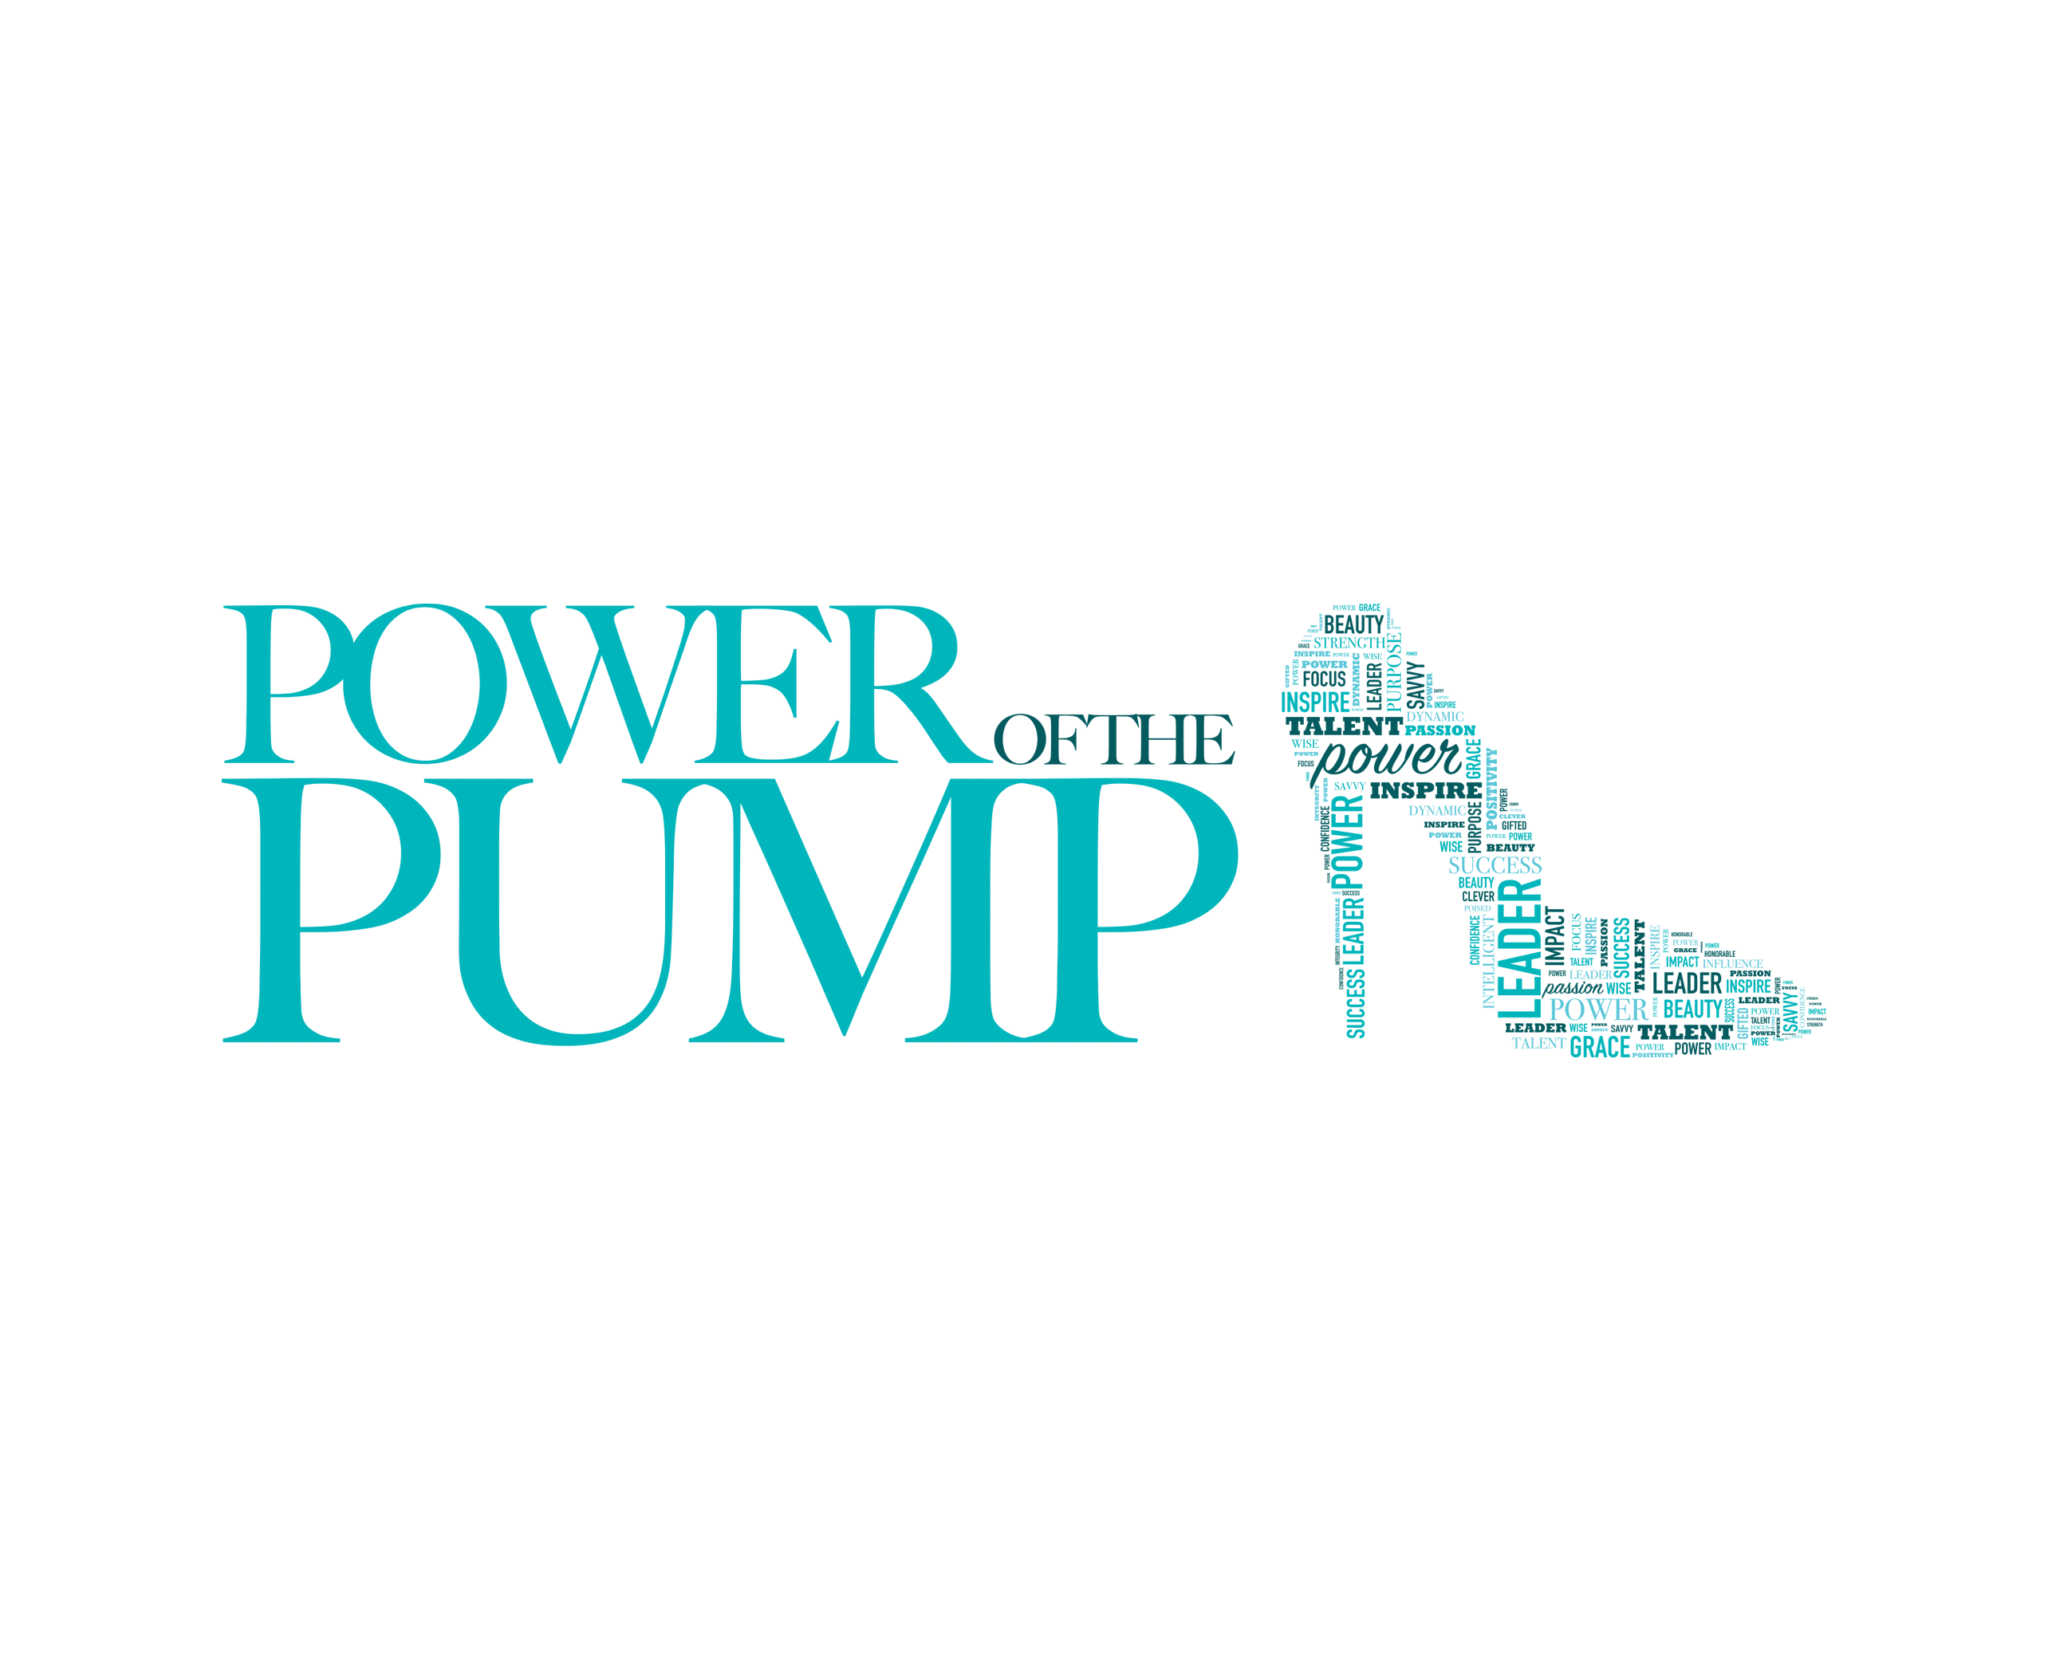 Power of the Pump